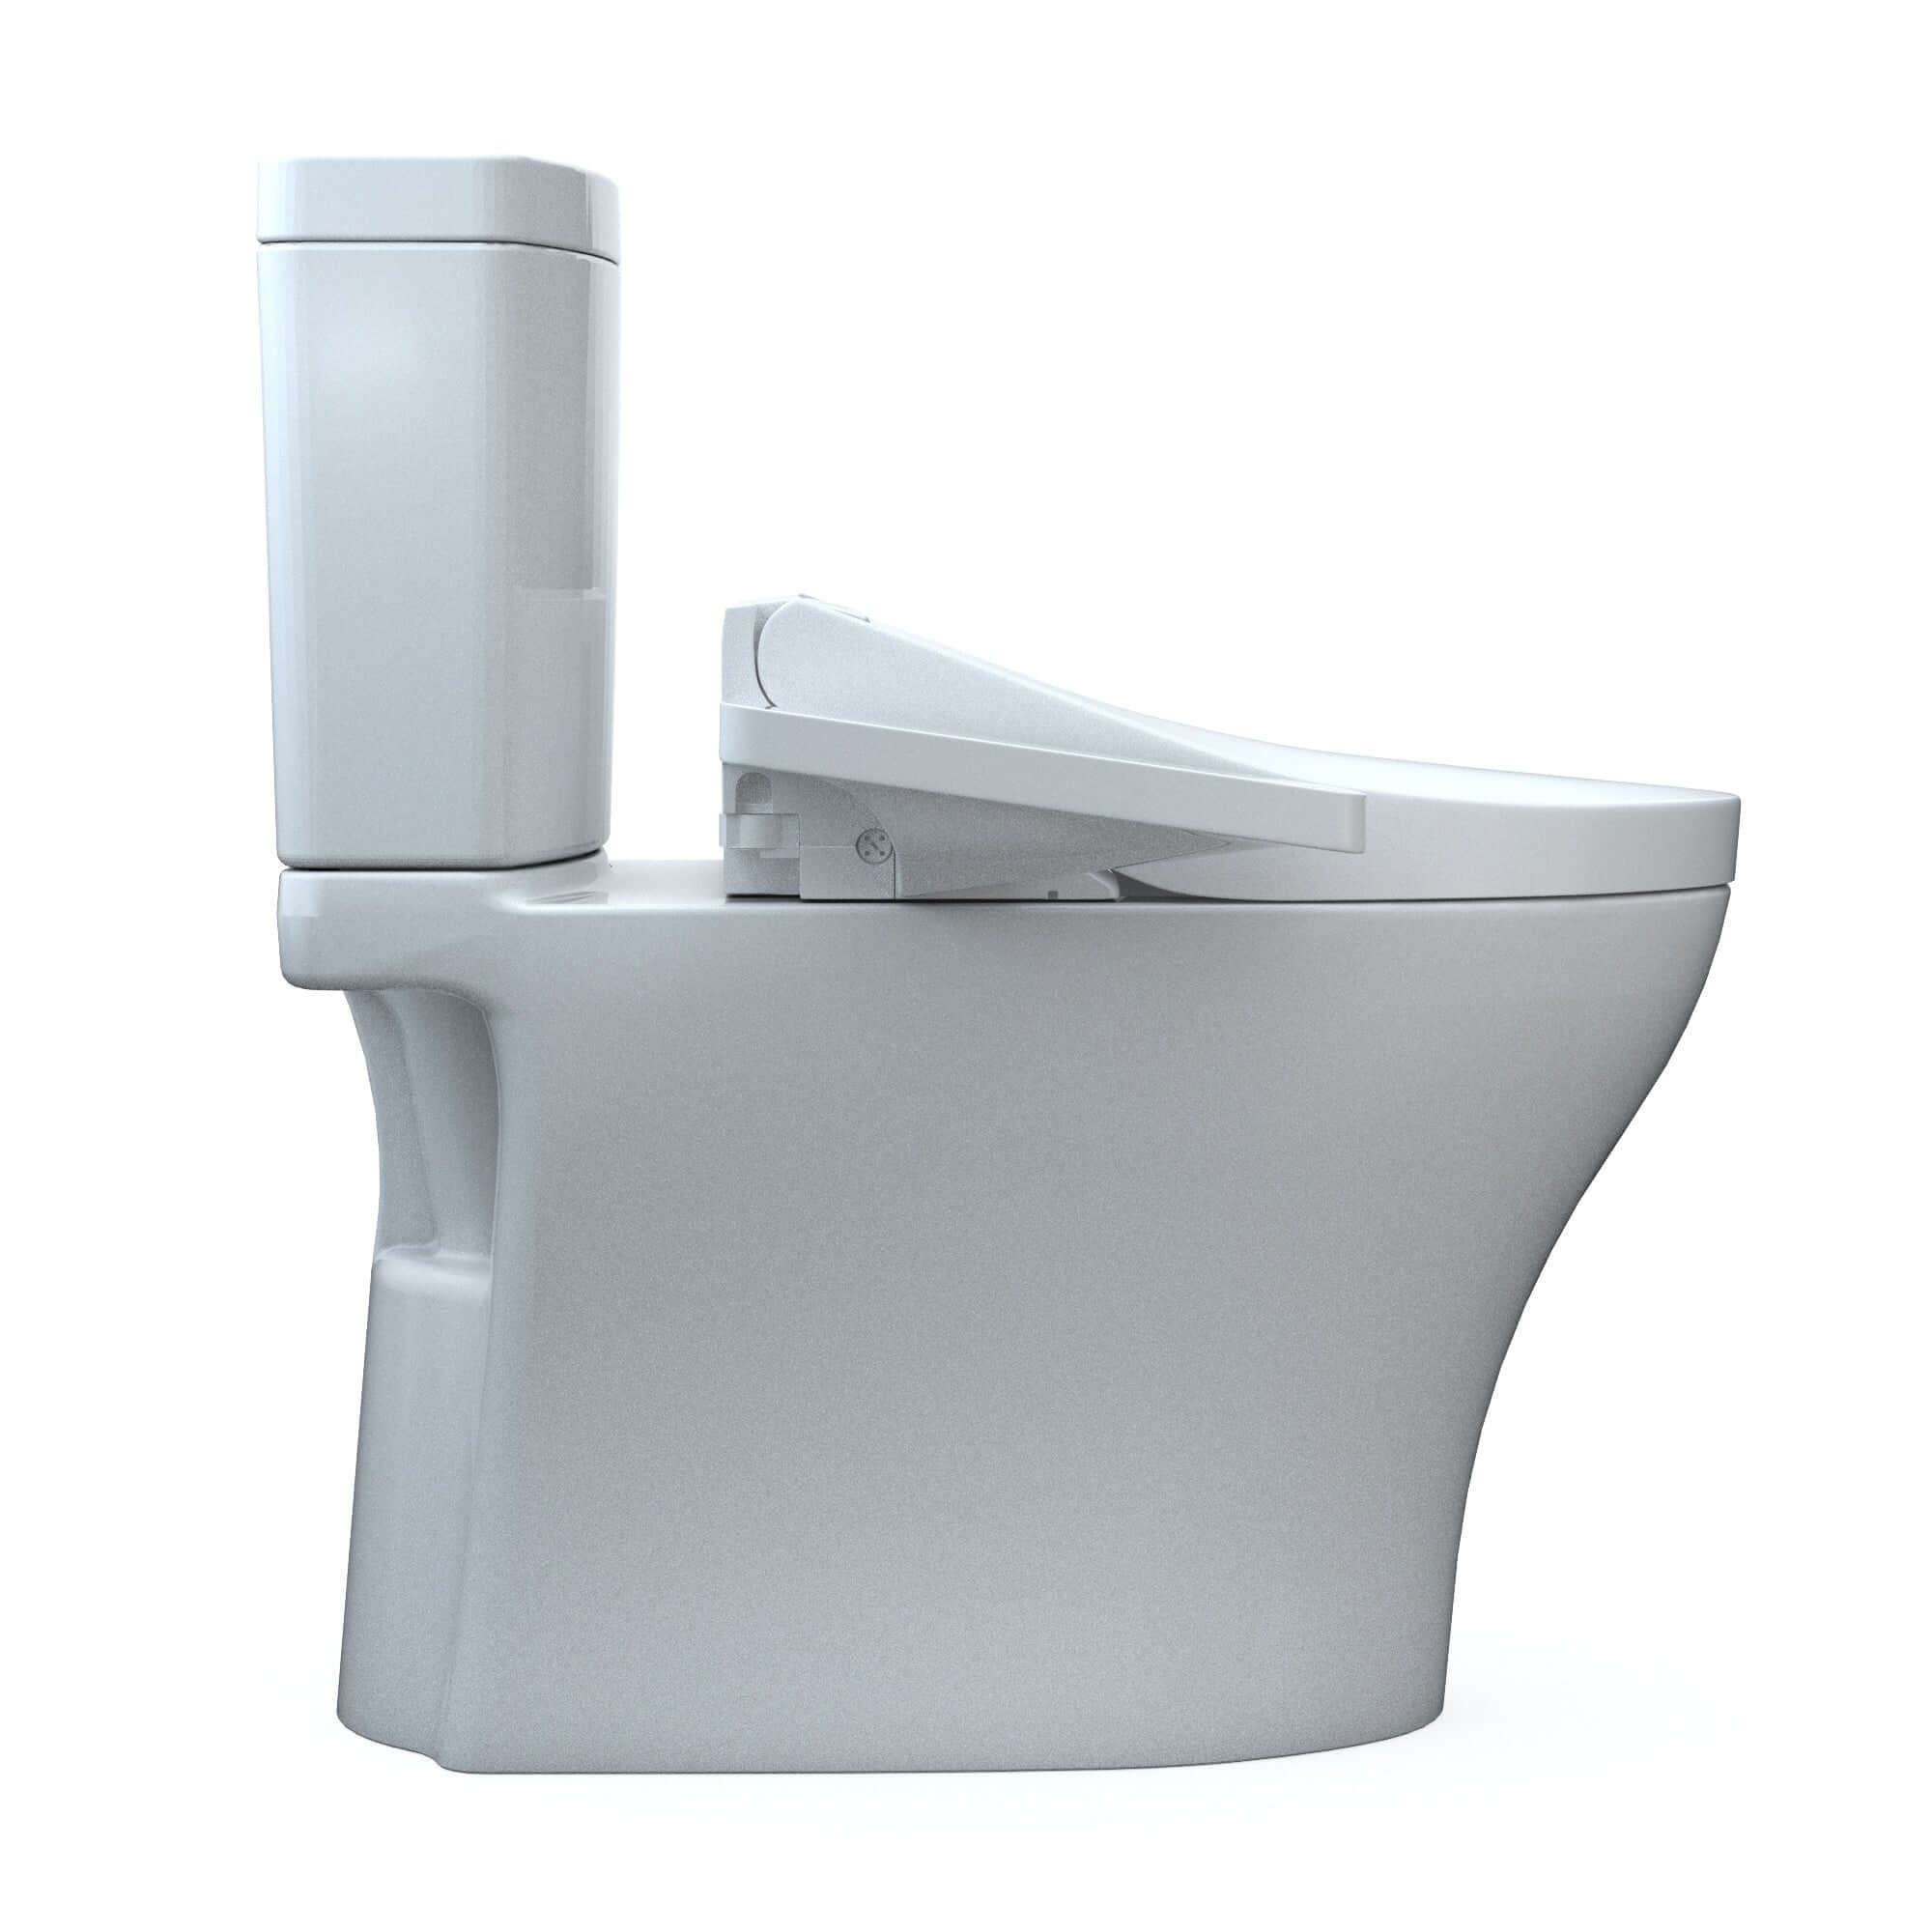 TOTO WASHLET+ Aquia IV Two-Piece Elongated Universal Height Dual Flush 1.28 and 0.9 GPF and C2 Bidet Toilet Seat | MW4463074CEMFGN#01